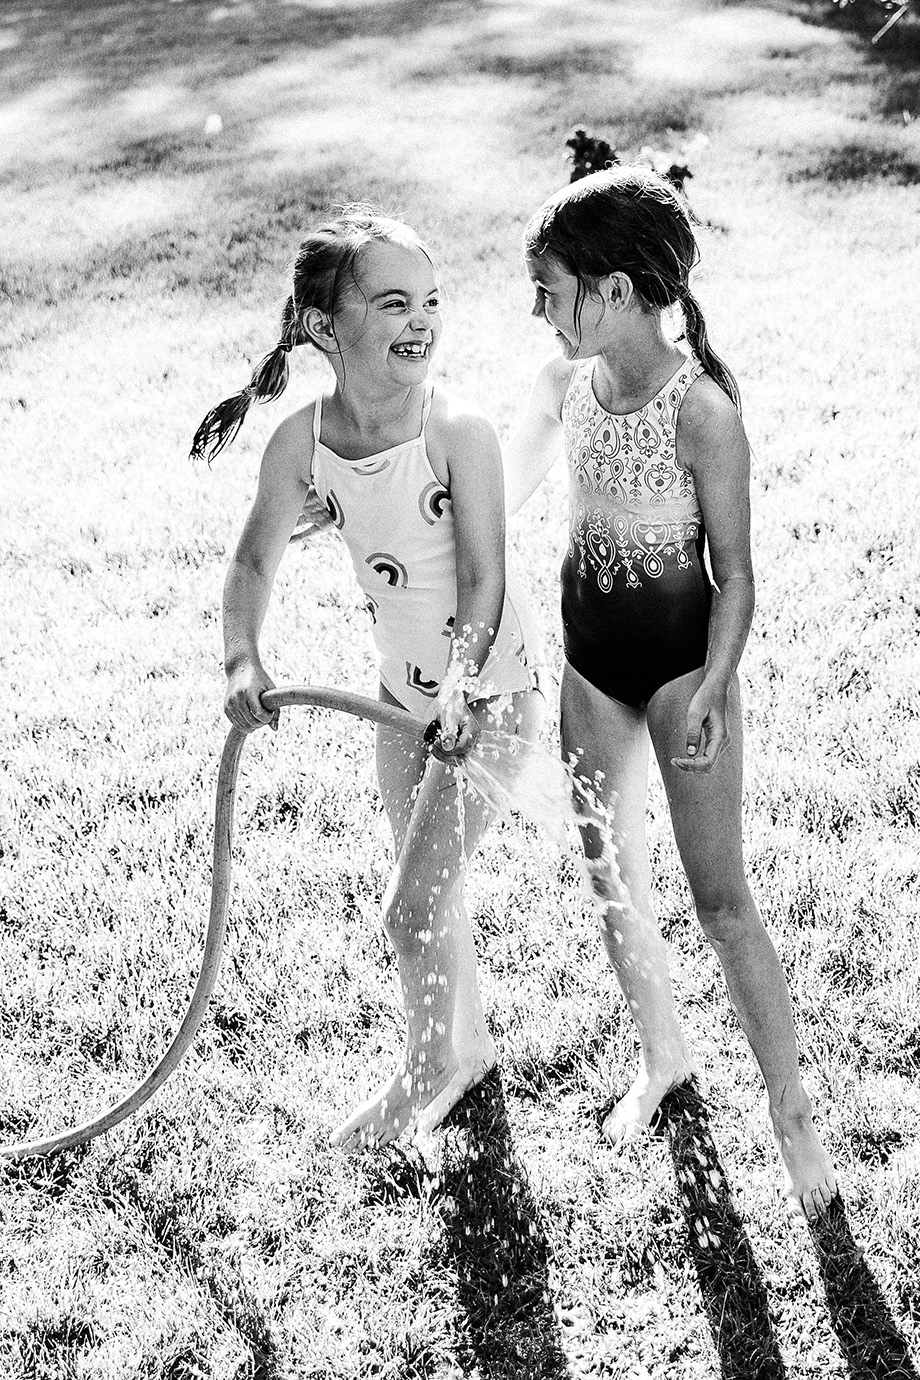 Two young girls playing outside with a garden hose.